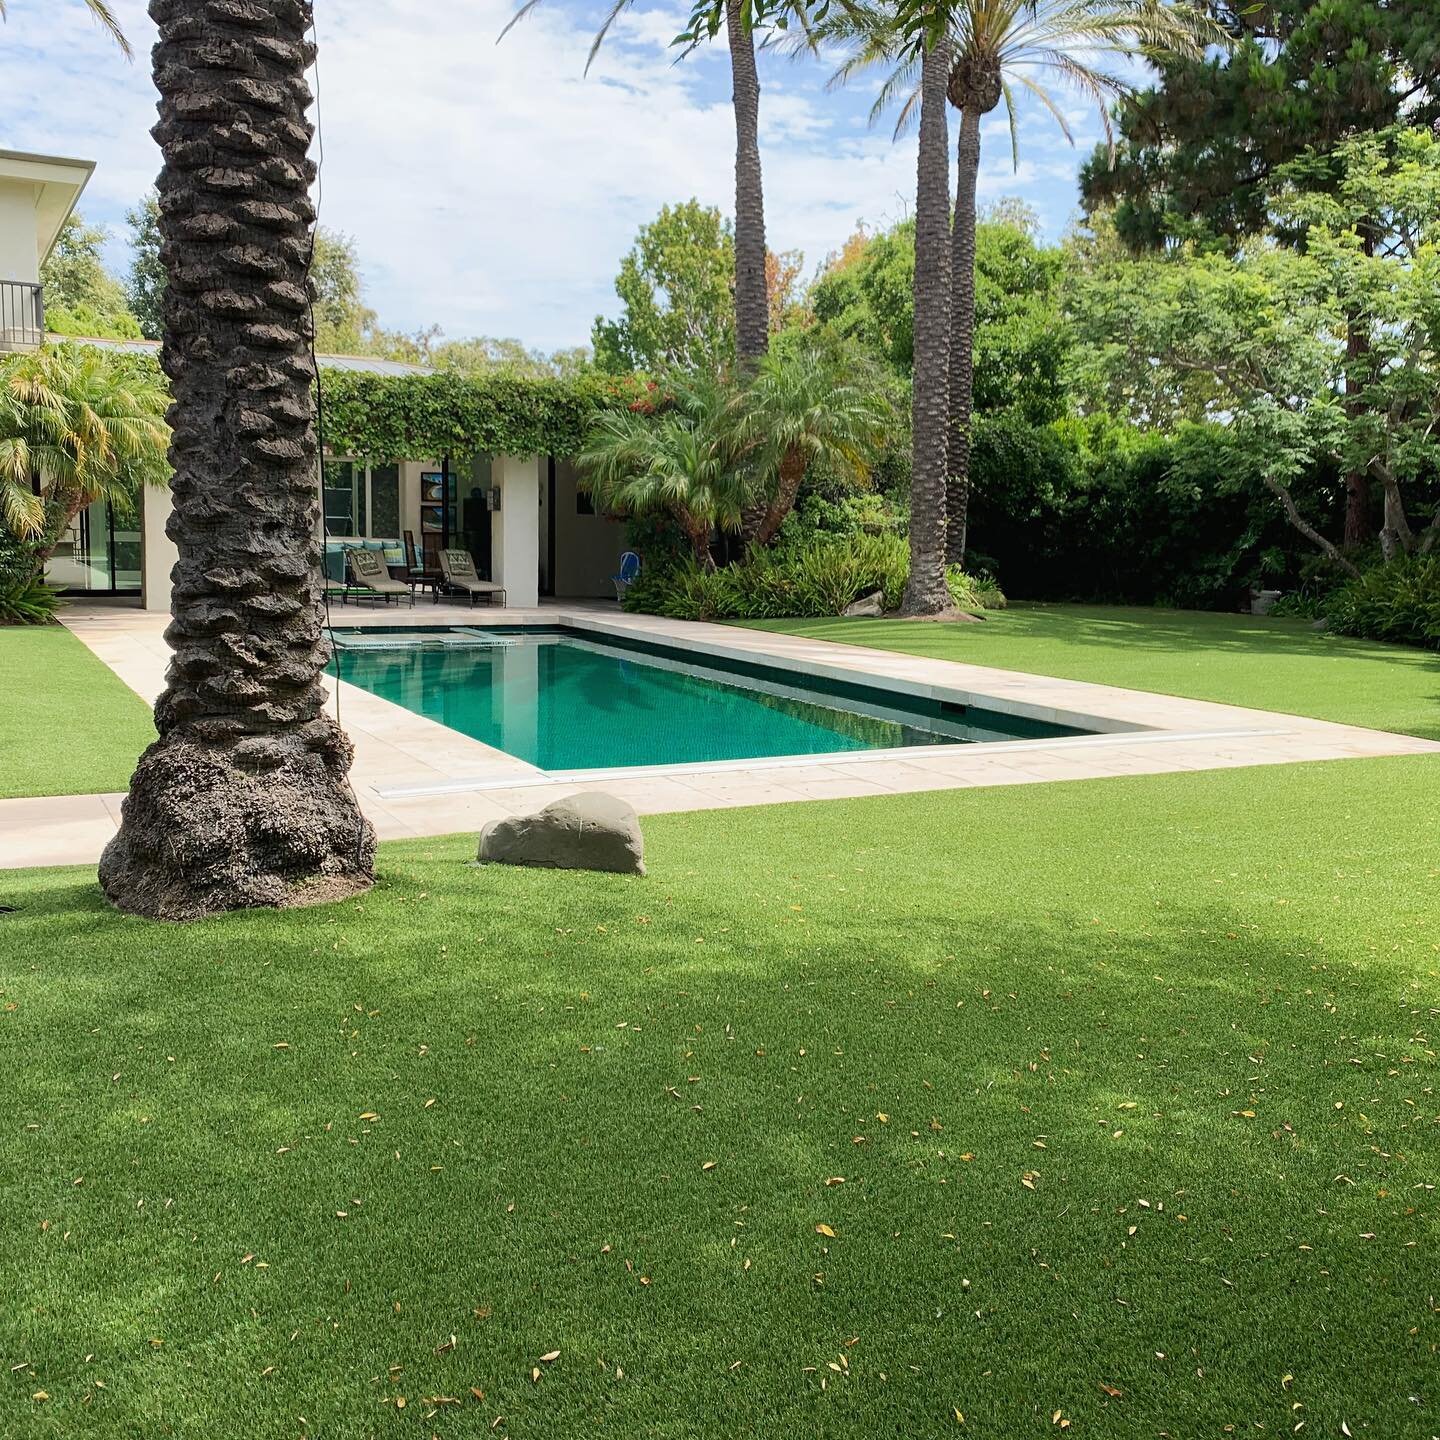 DID YOU KNOW? 

T&deg;Cool was invented at a pool surround turf project in Cincinnati, Ohio. Chris and his design build team installed synthetic turf on a project for the very first time. While the turf proved to be a nice design element, there was a